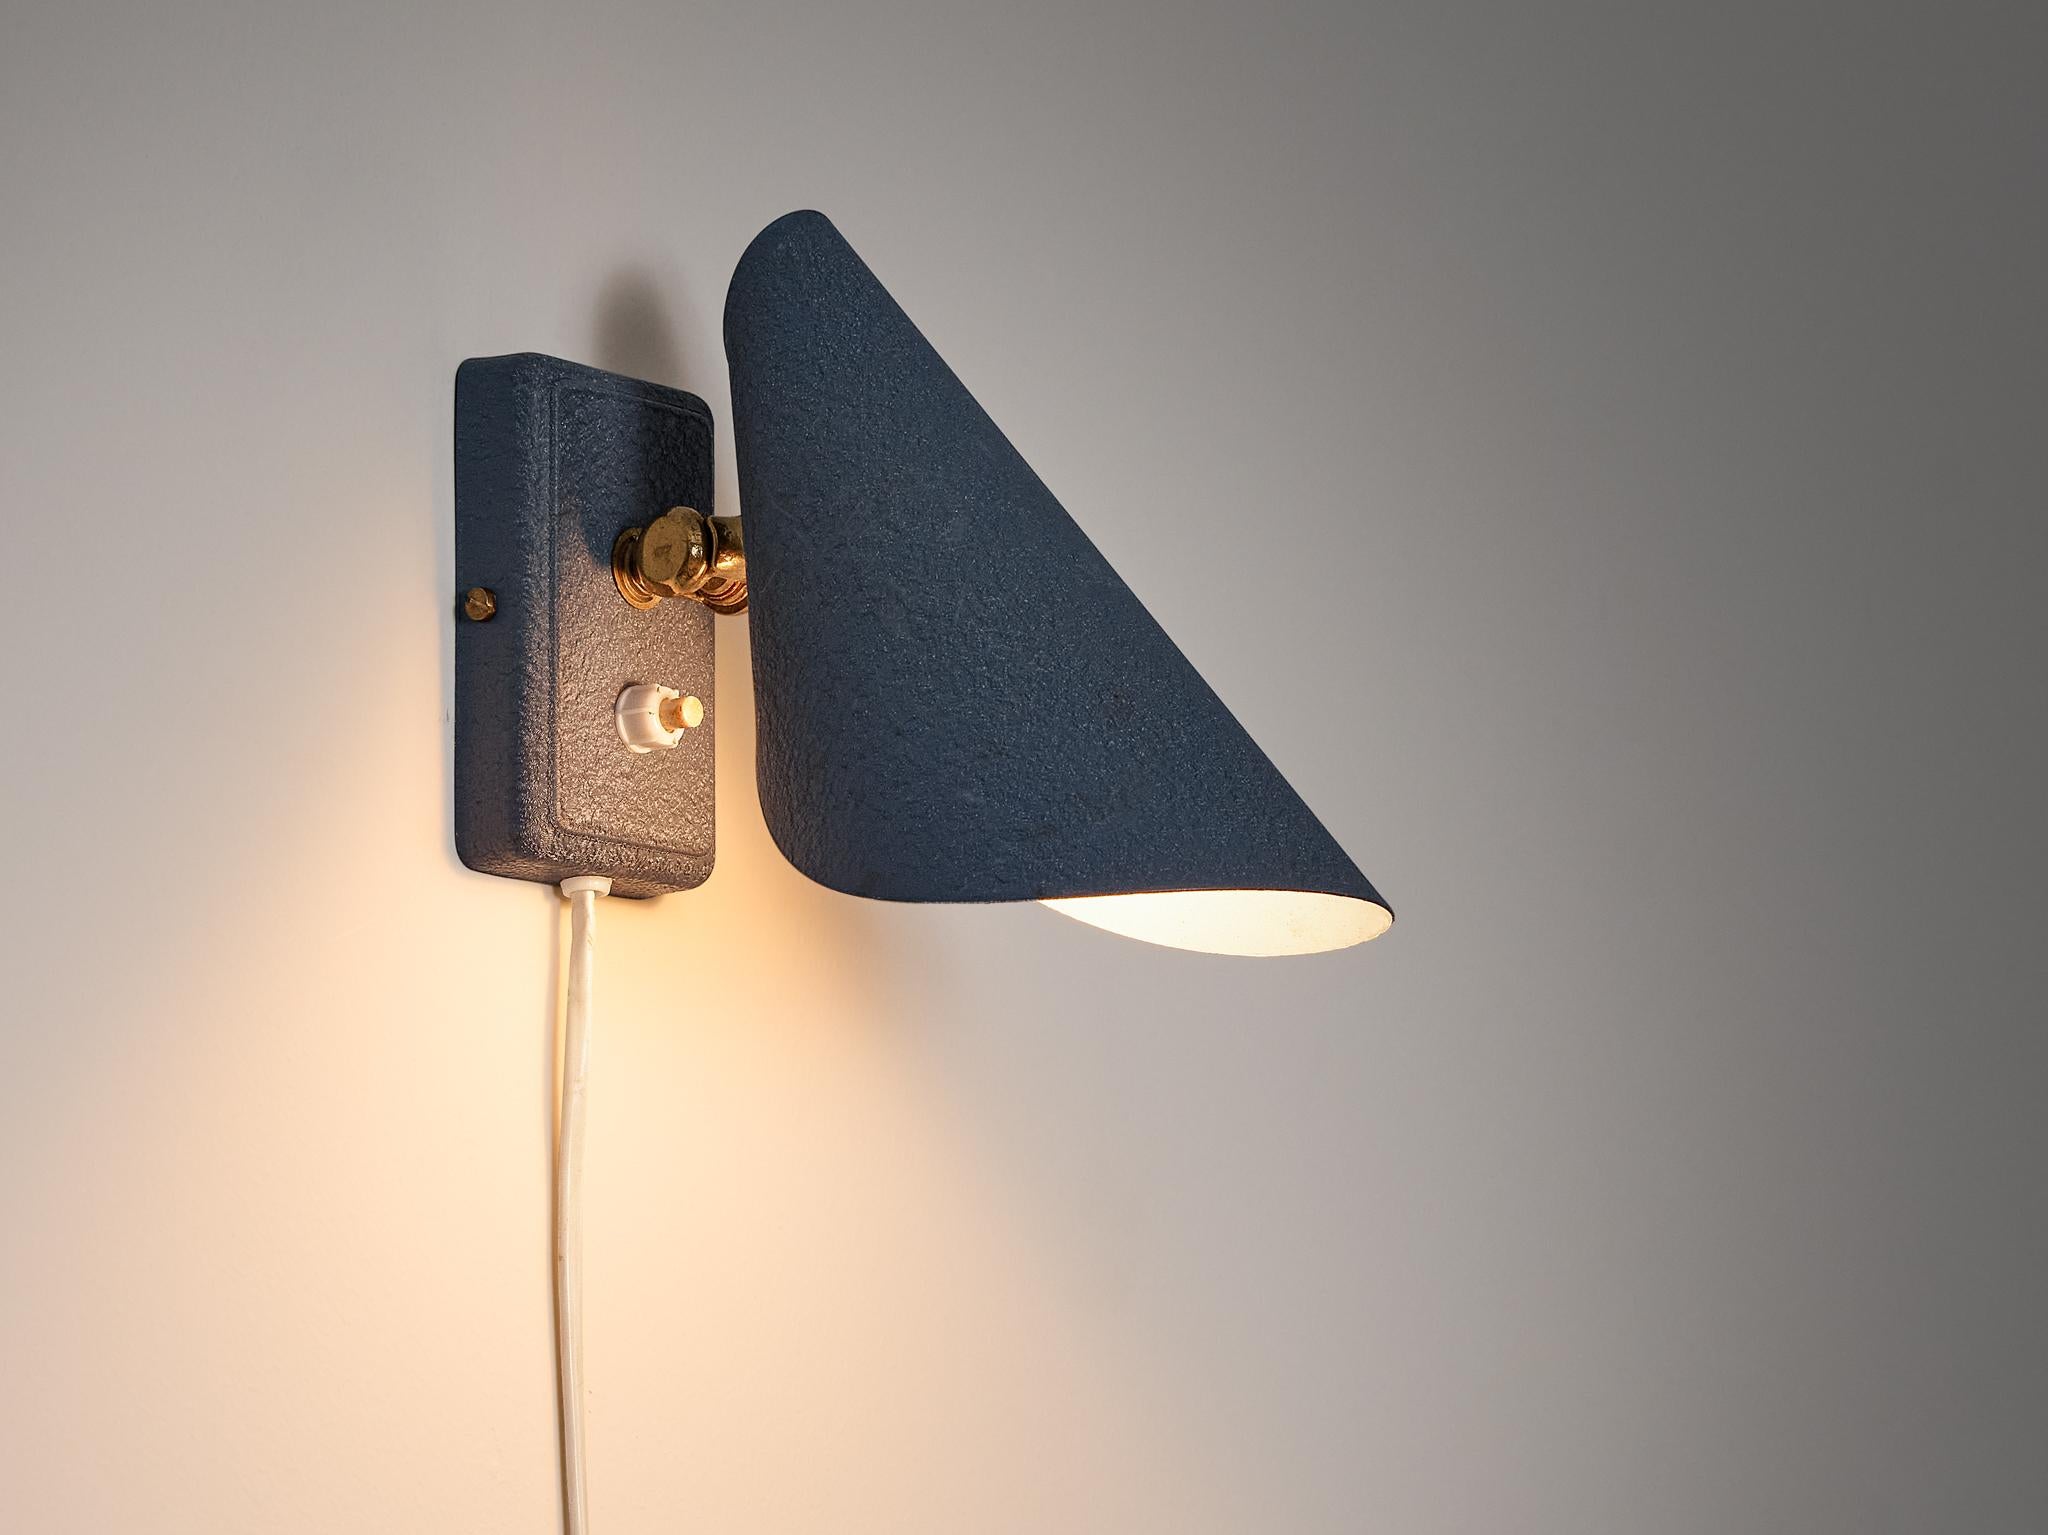 Wall light, texturised metal, brass, Europe, 1950s

Attractive wall light in blue metal with brass detailing. The hood of this wall lamp has a very elegant curve. This small light produces a strong and bright light, perfect for a reading nook or